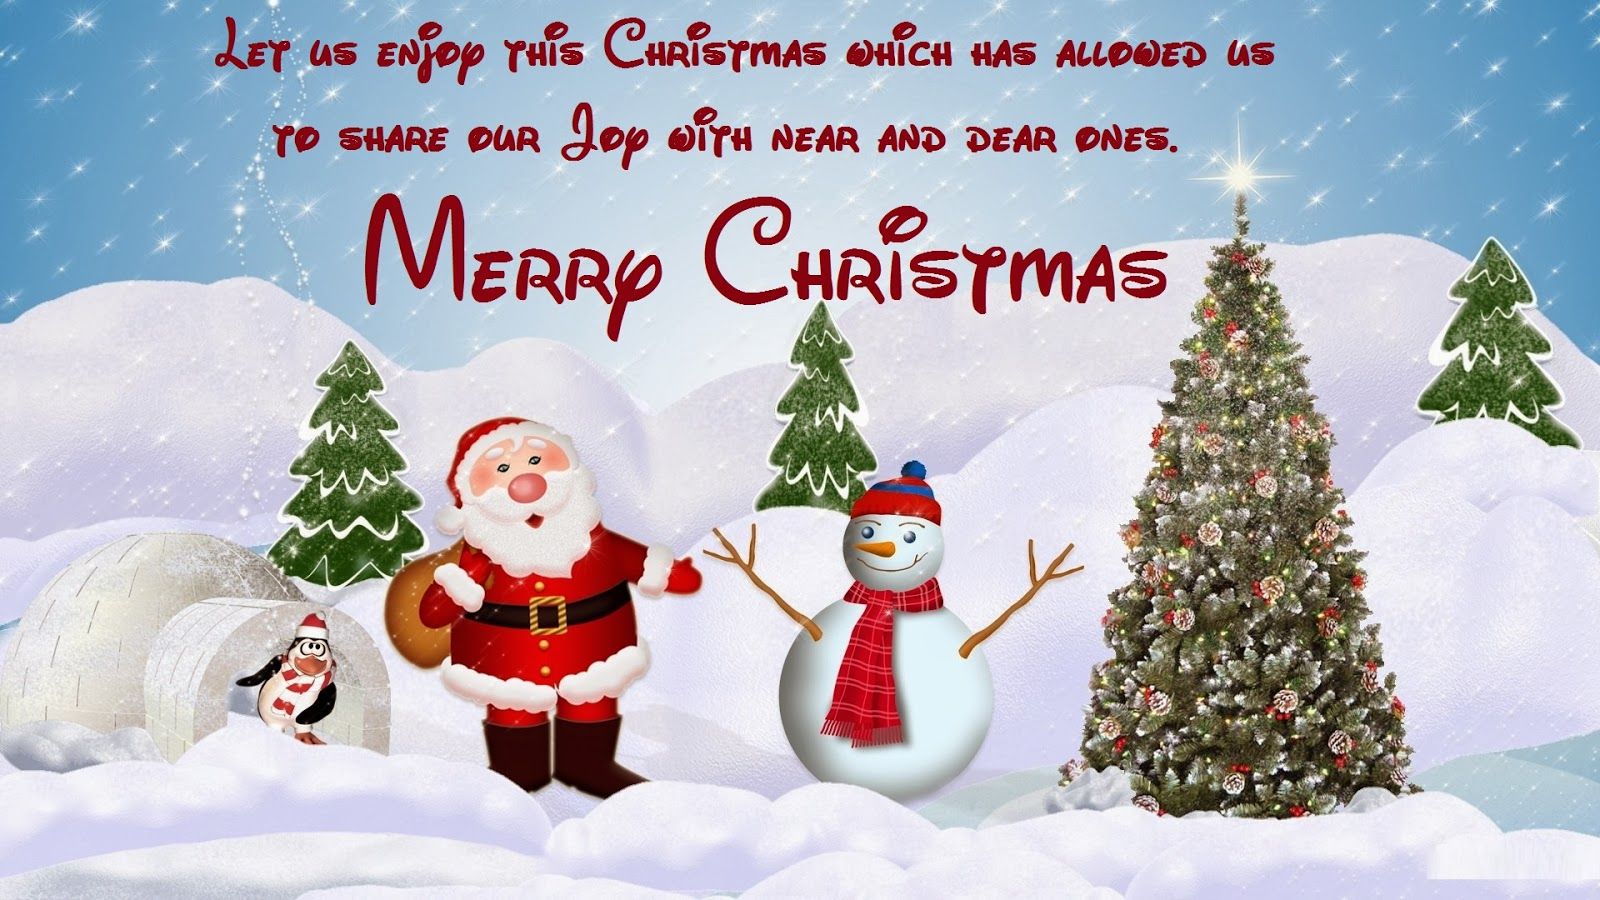 Merry Christmas Santa Claus F. Merry Christmas Card Greetings, Happy Merry Christmas, Merry Christmas Quotes